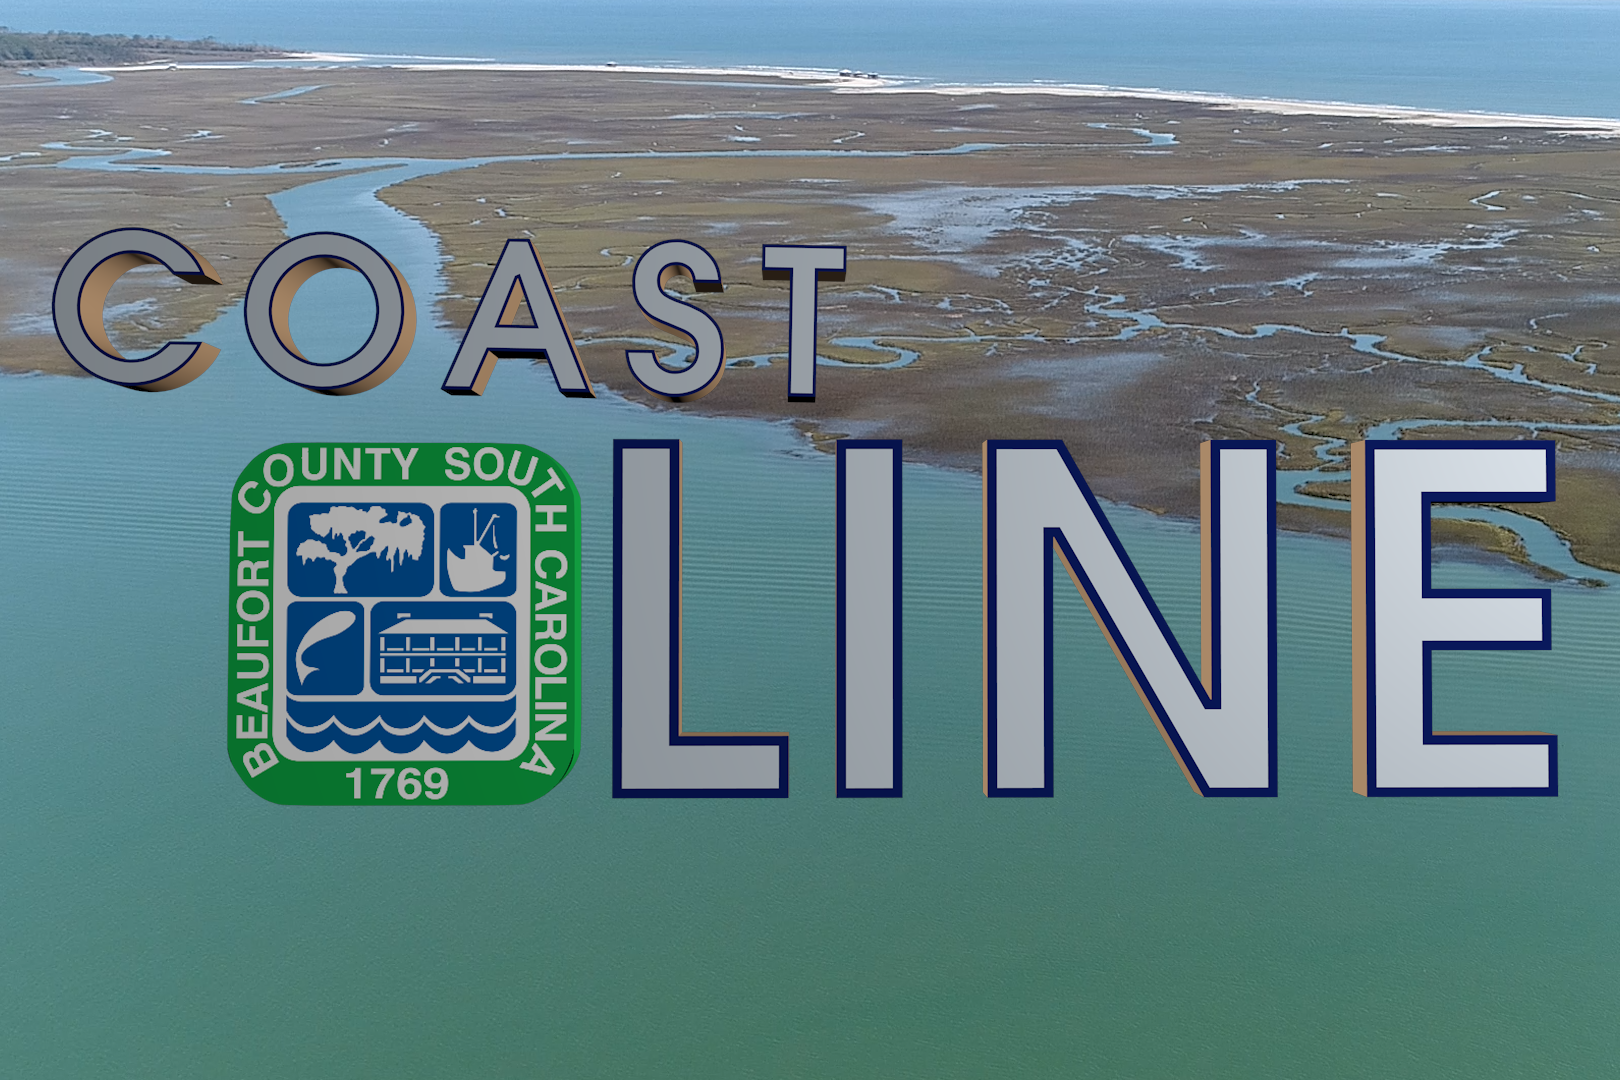 New Coastline Episode Features Holiday Season Events in the Lowcountry